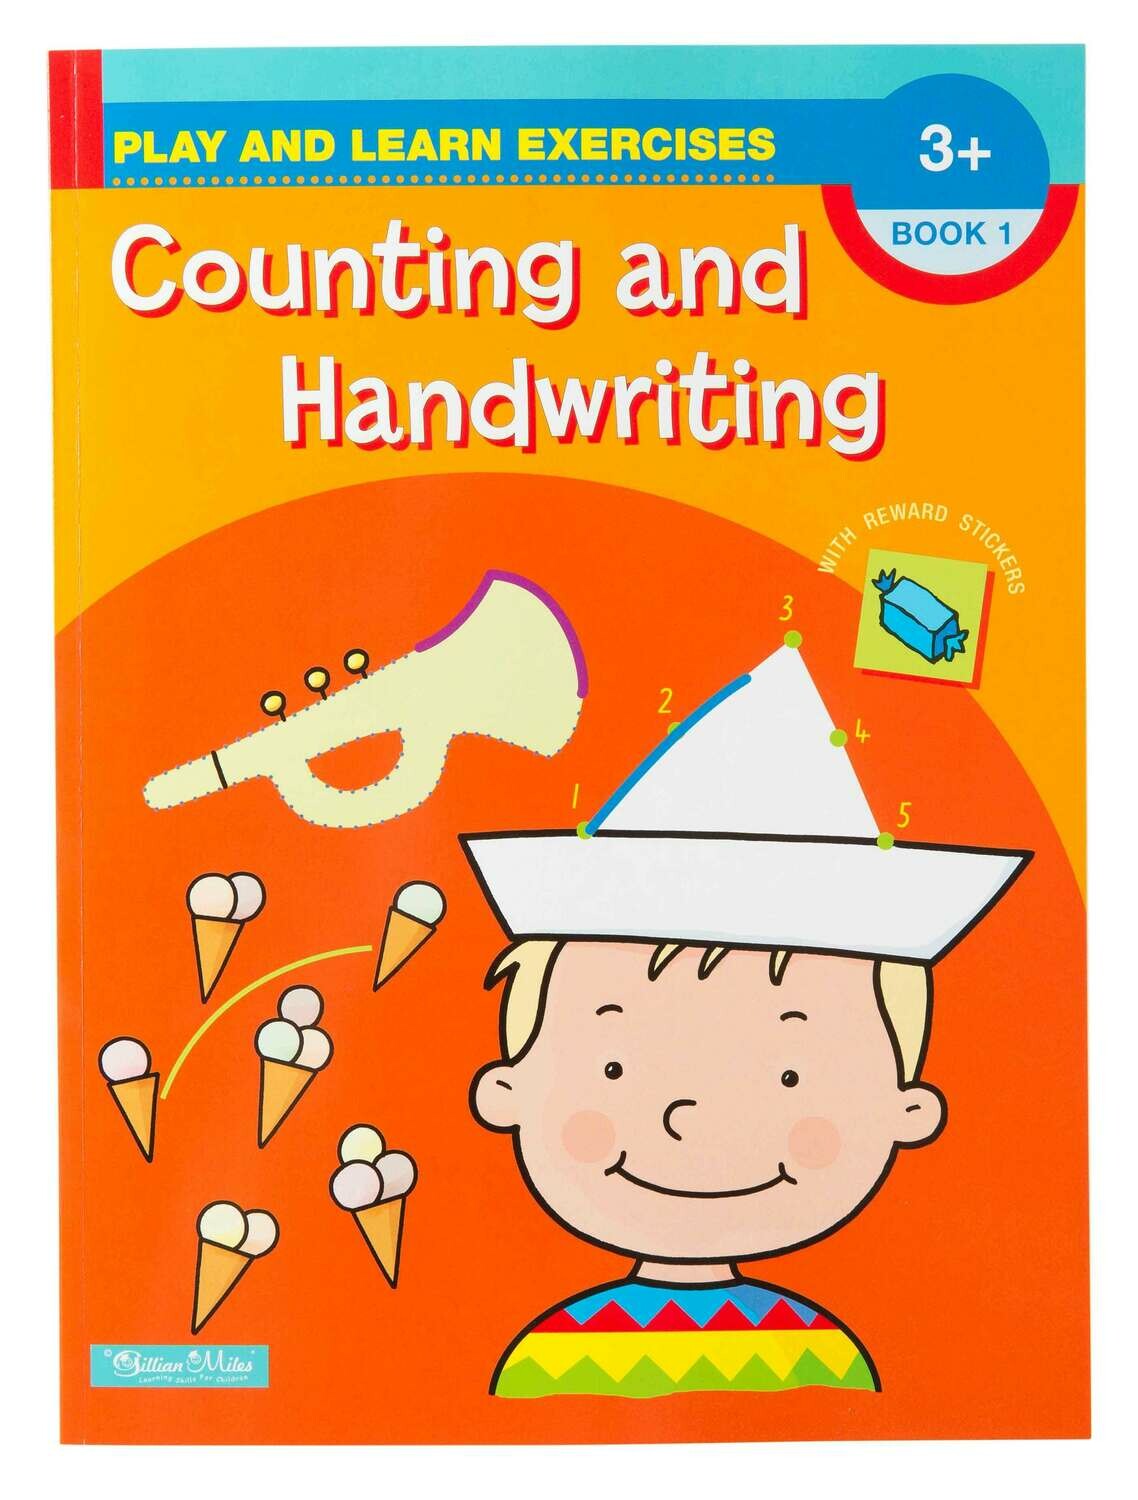 Play and Learn Counting and Handwriting Book